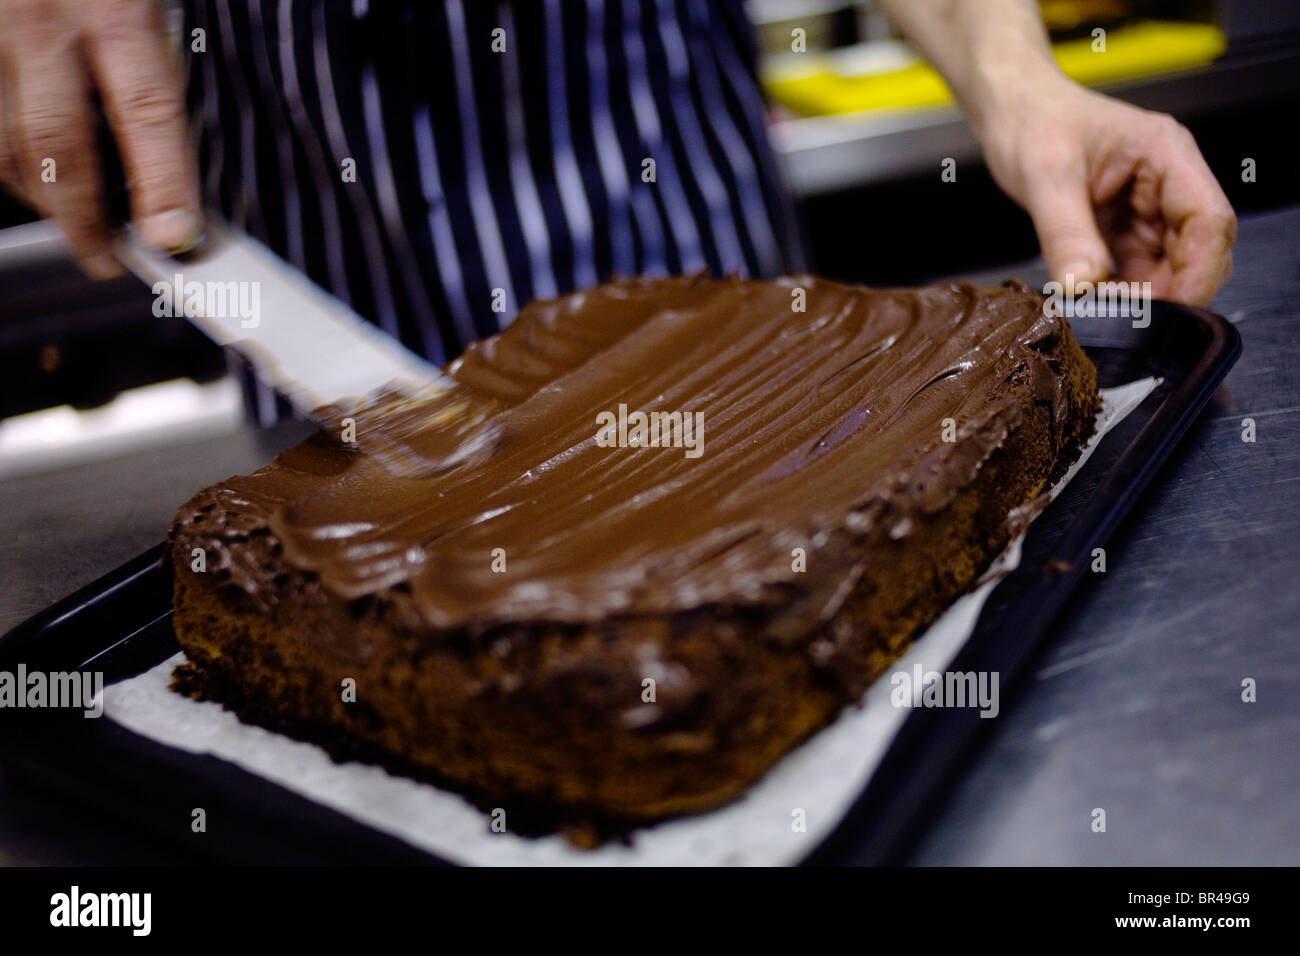 A chef giving his chocolate brownie a chocolate topping. Stock Photo